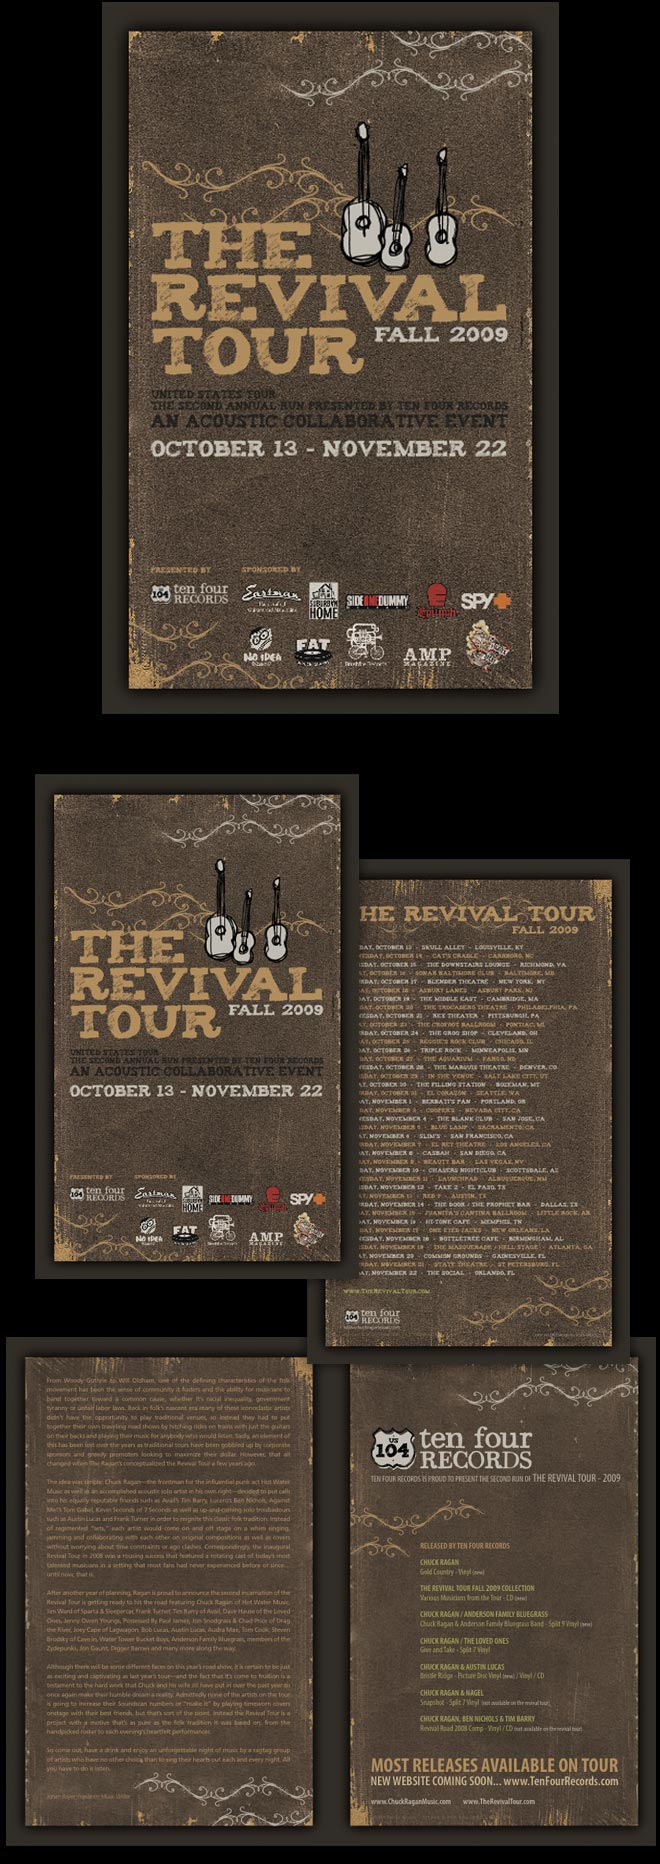 The Revival Tour Promo Materials